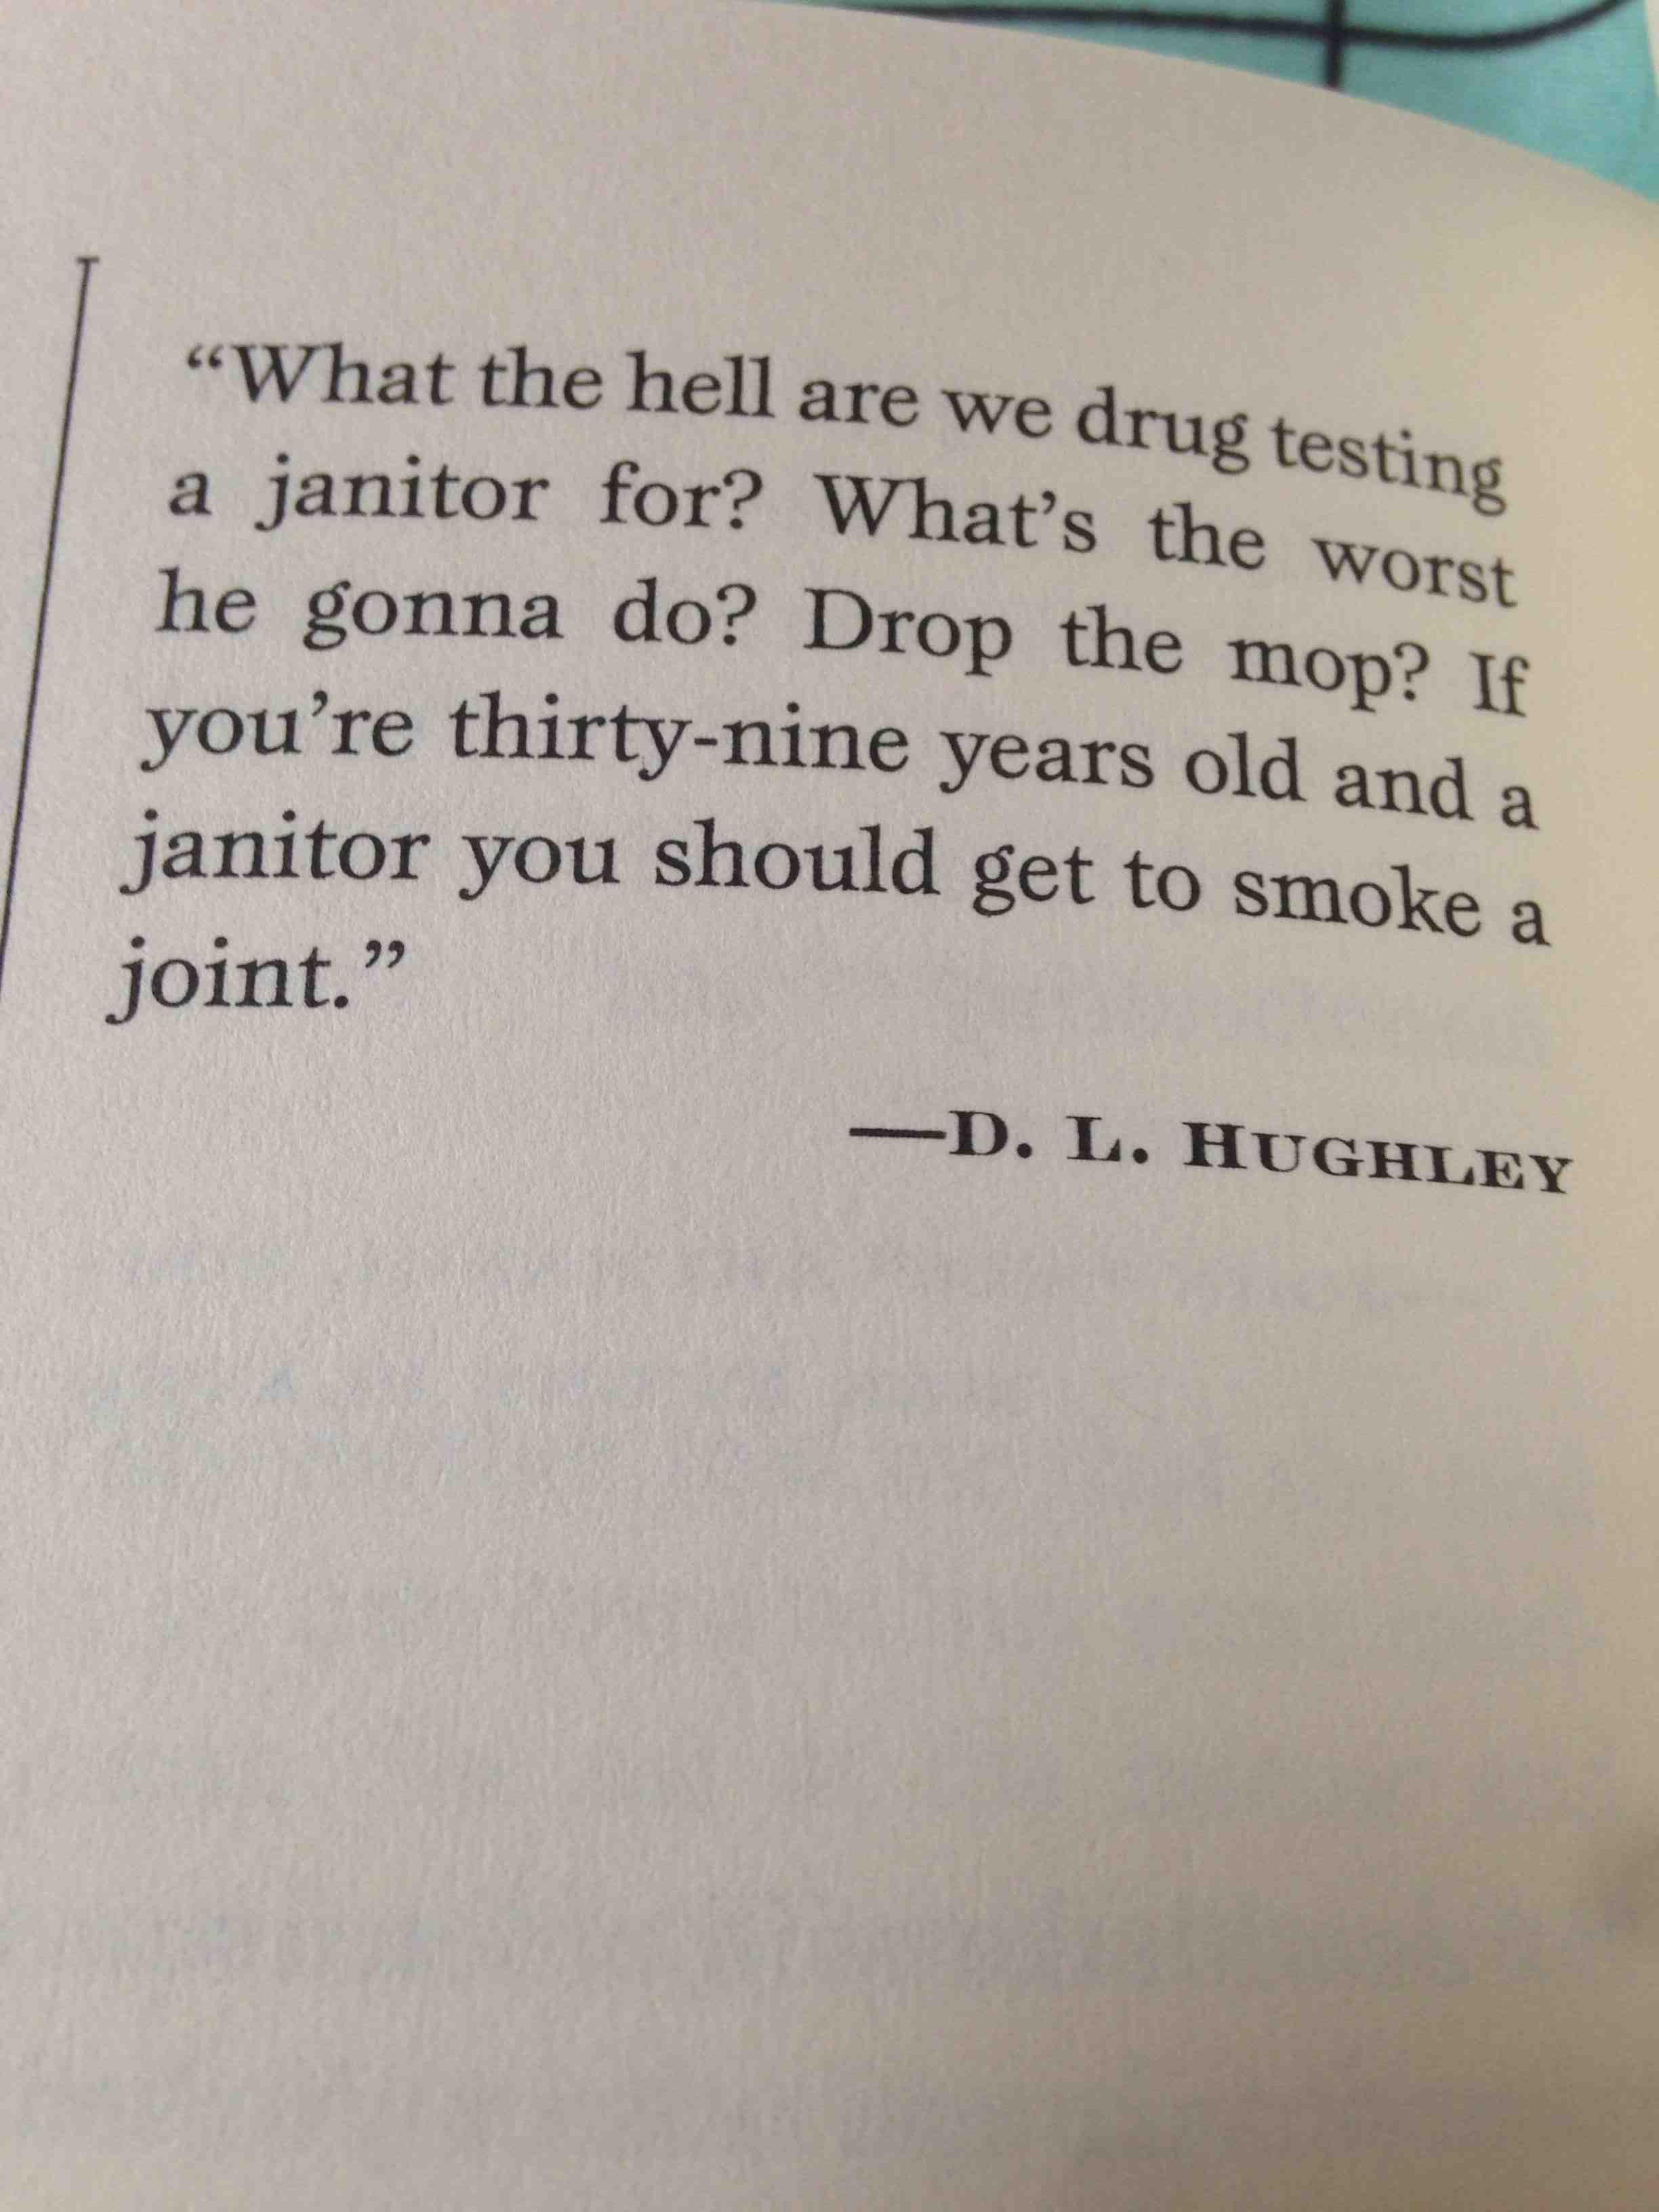 smoke weed jokes - What the hell are we drug testing a janitor for? What's the worst he gonna do? Drop the mop? If you're thirtynine years old and a janitor you should get to smoke a joint. D. L. Hughley